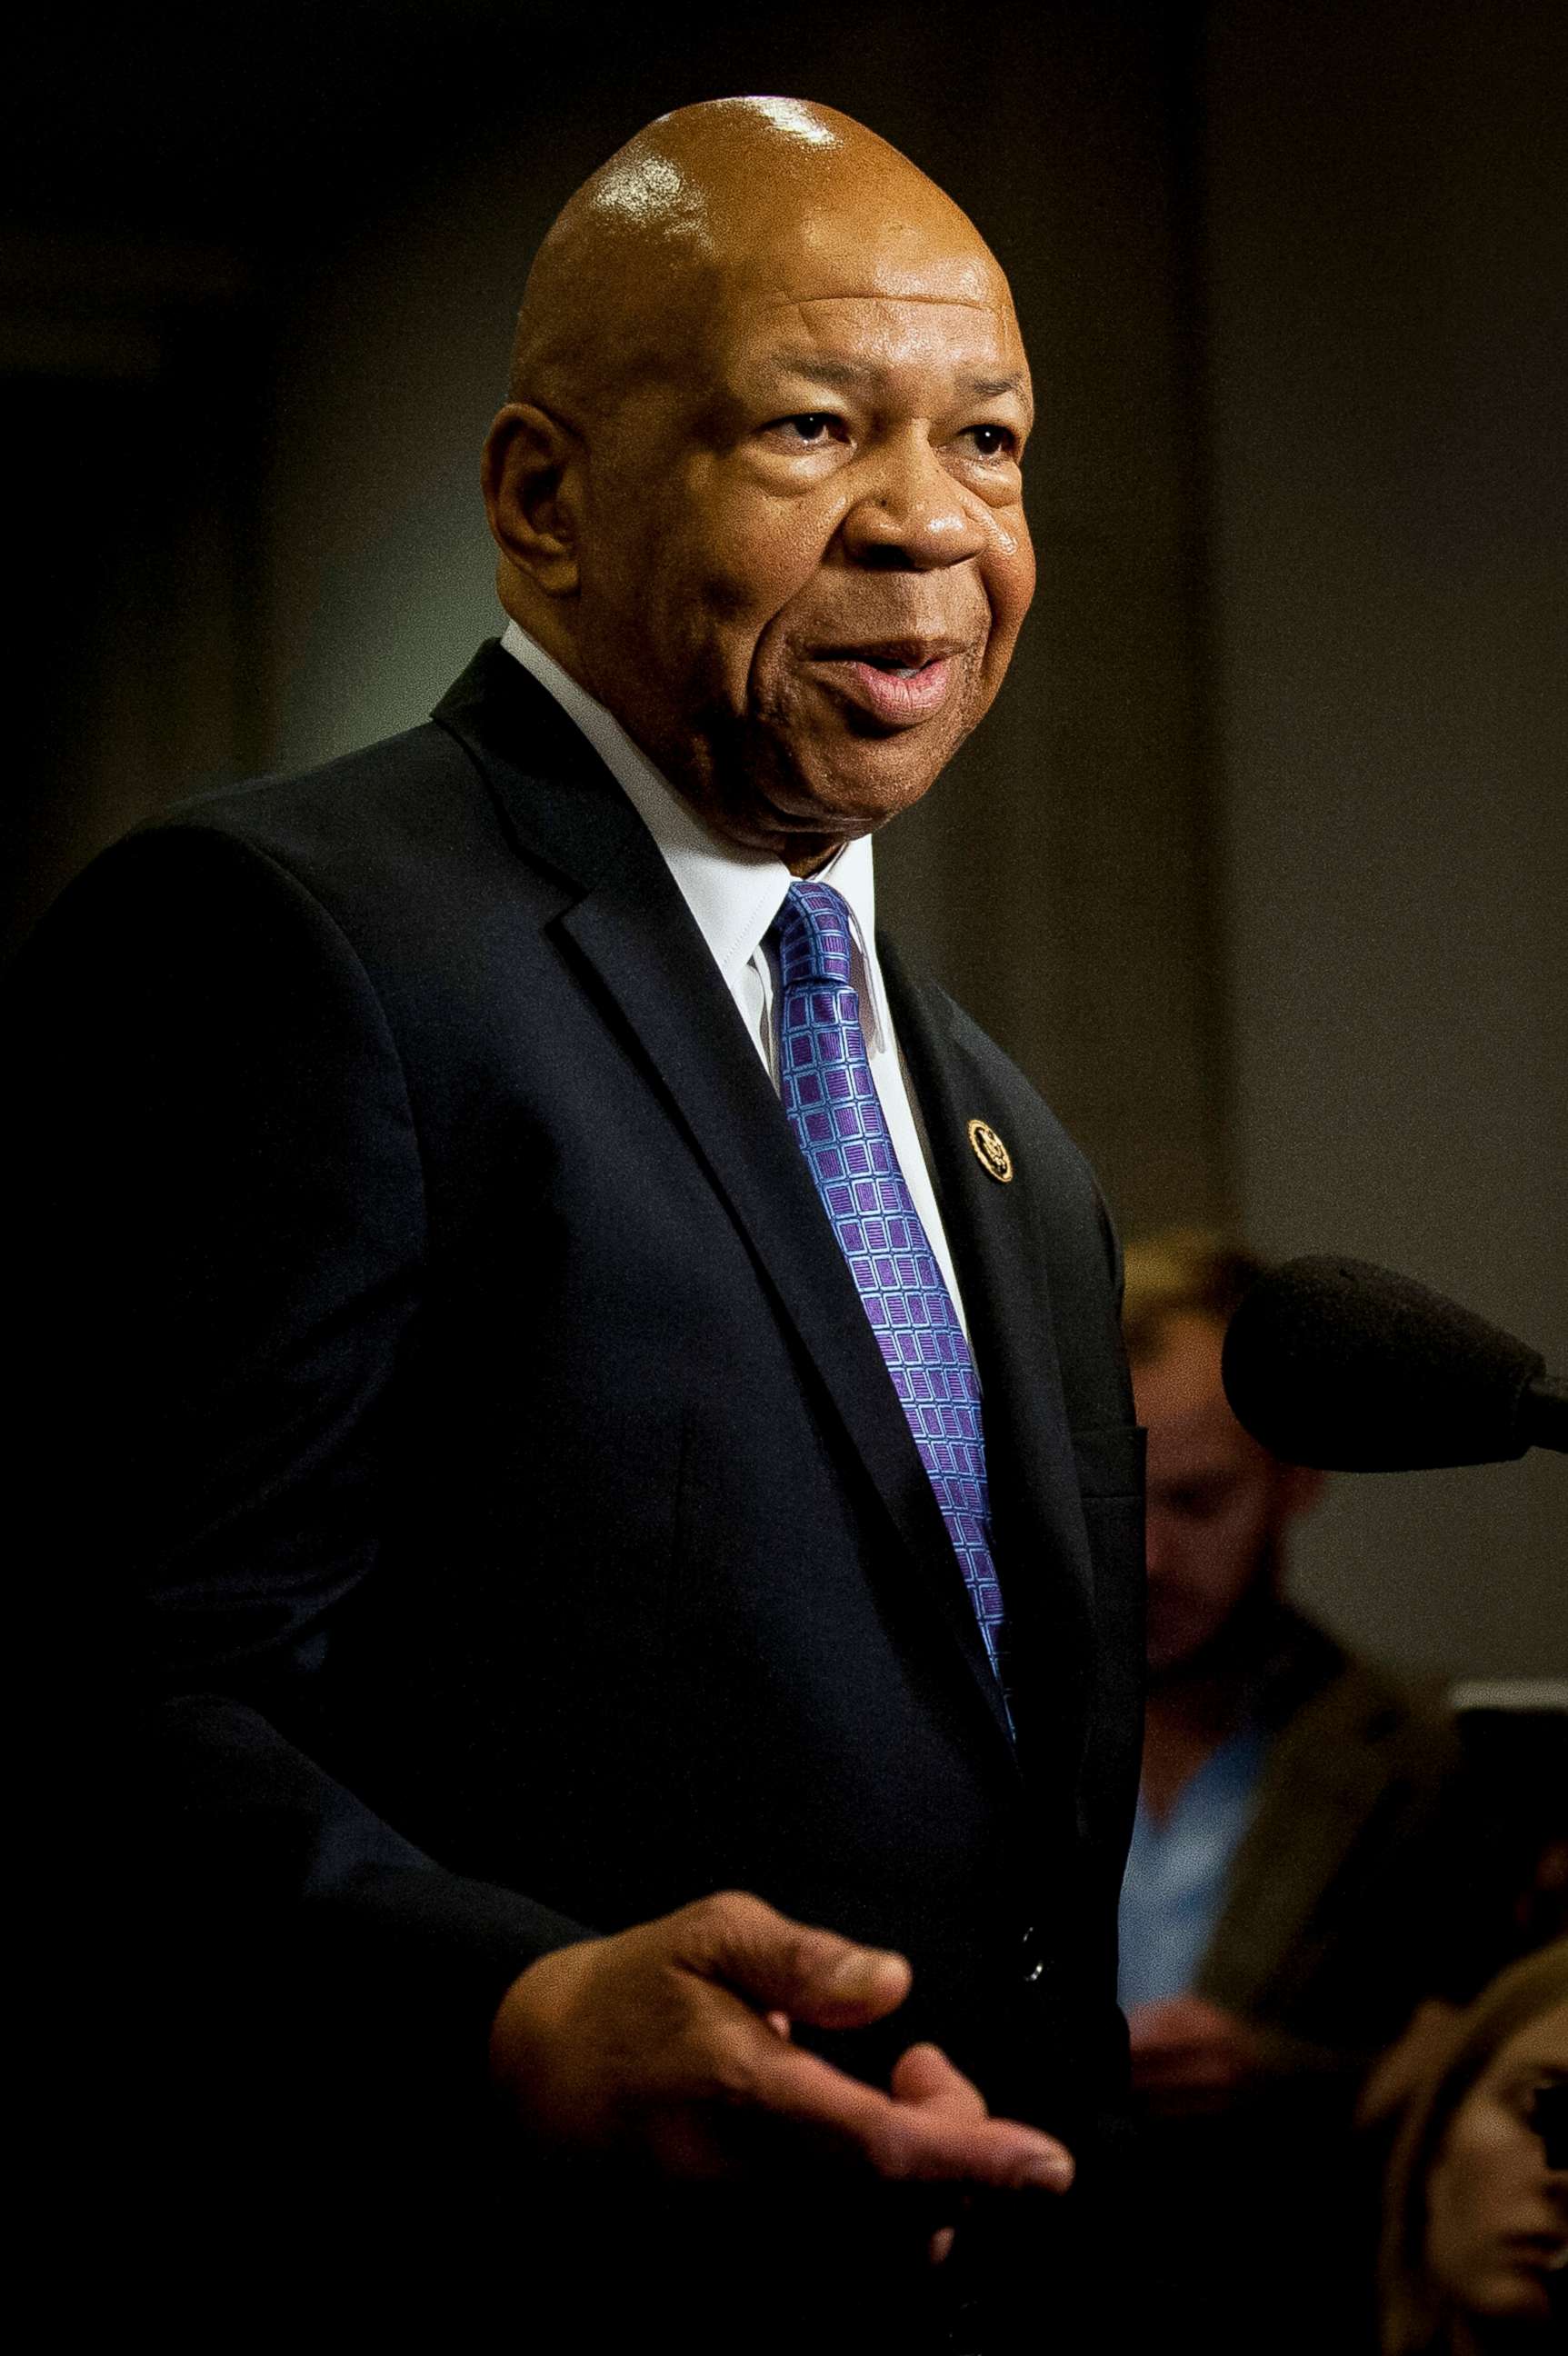 PHOTO: Representative Elijah Cummings attends a press conference at the Capitol in Washington, Oct. 16, 2015.